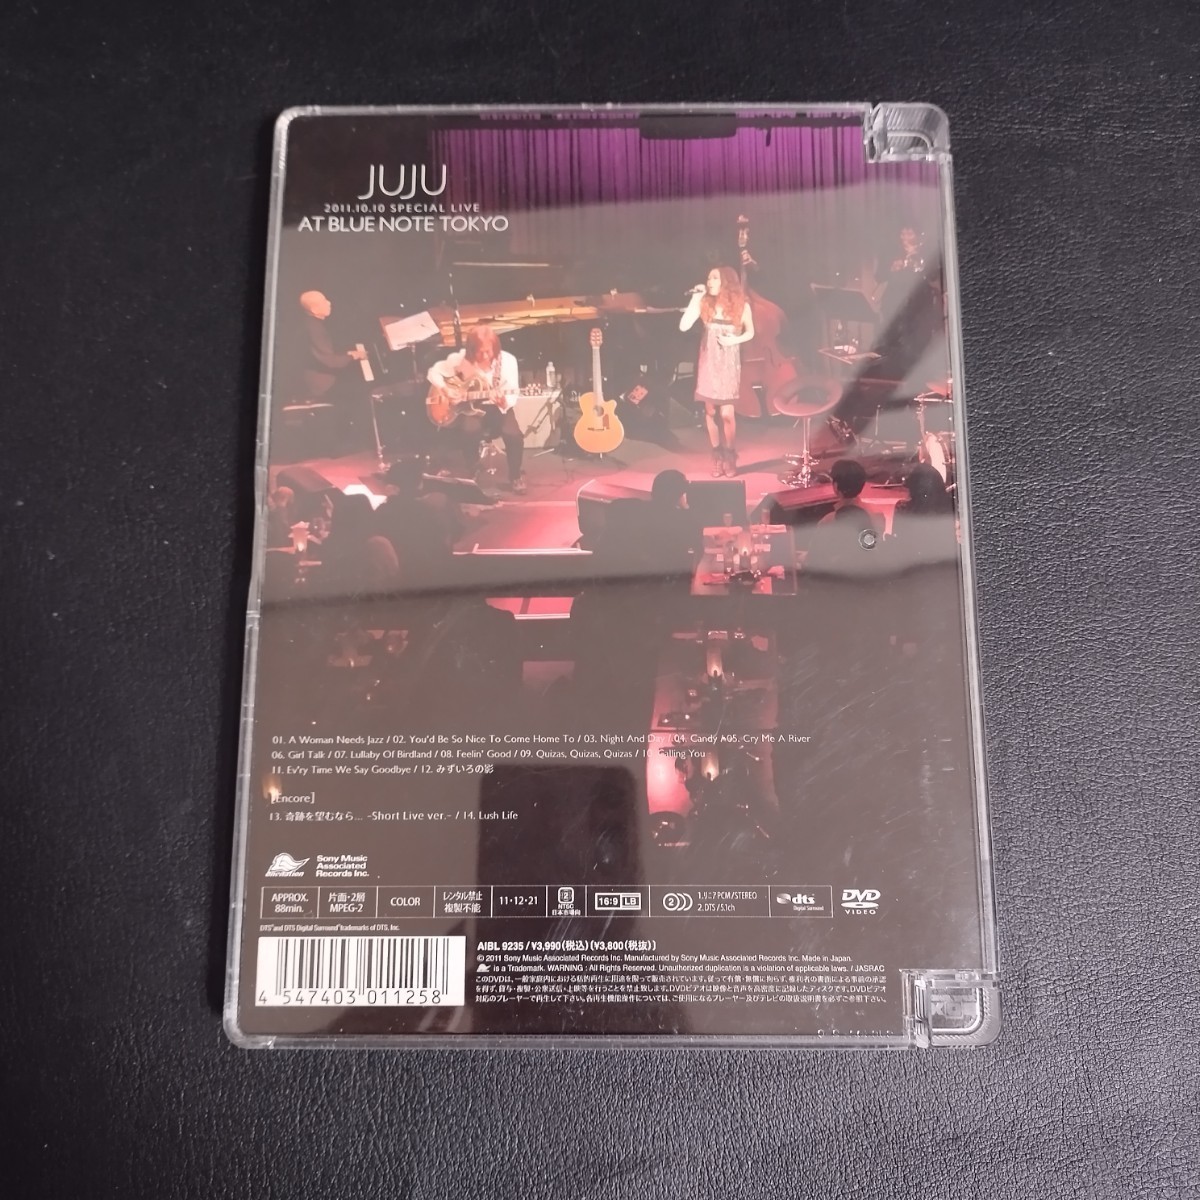 【JUJU】2011.10.10 SPECIAL LIVE AT BLUE NOTE TOKYO 邦楽DVD 棚Eの画像2